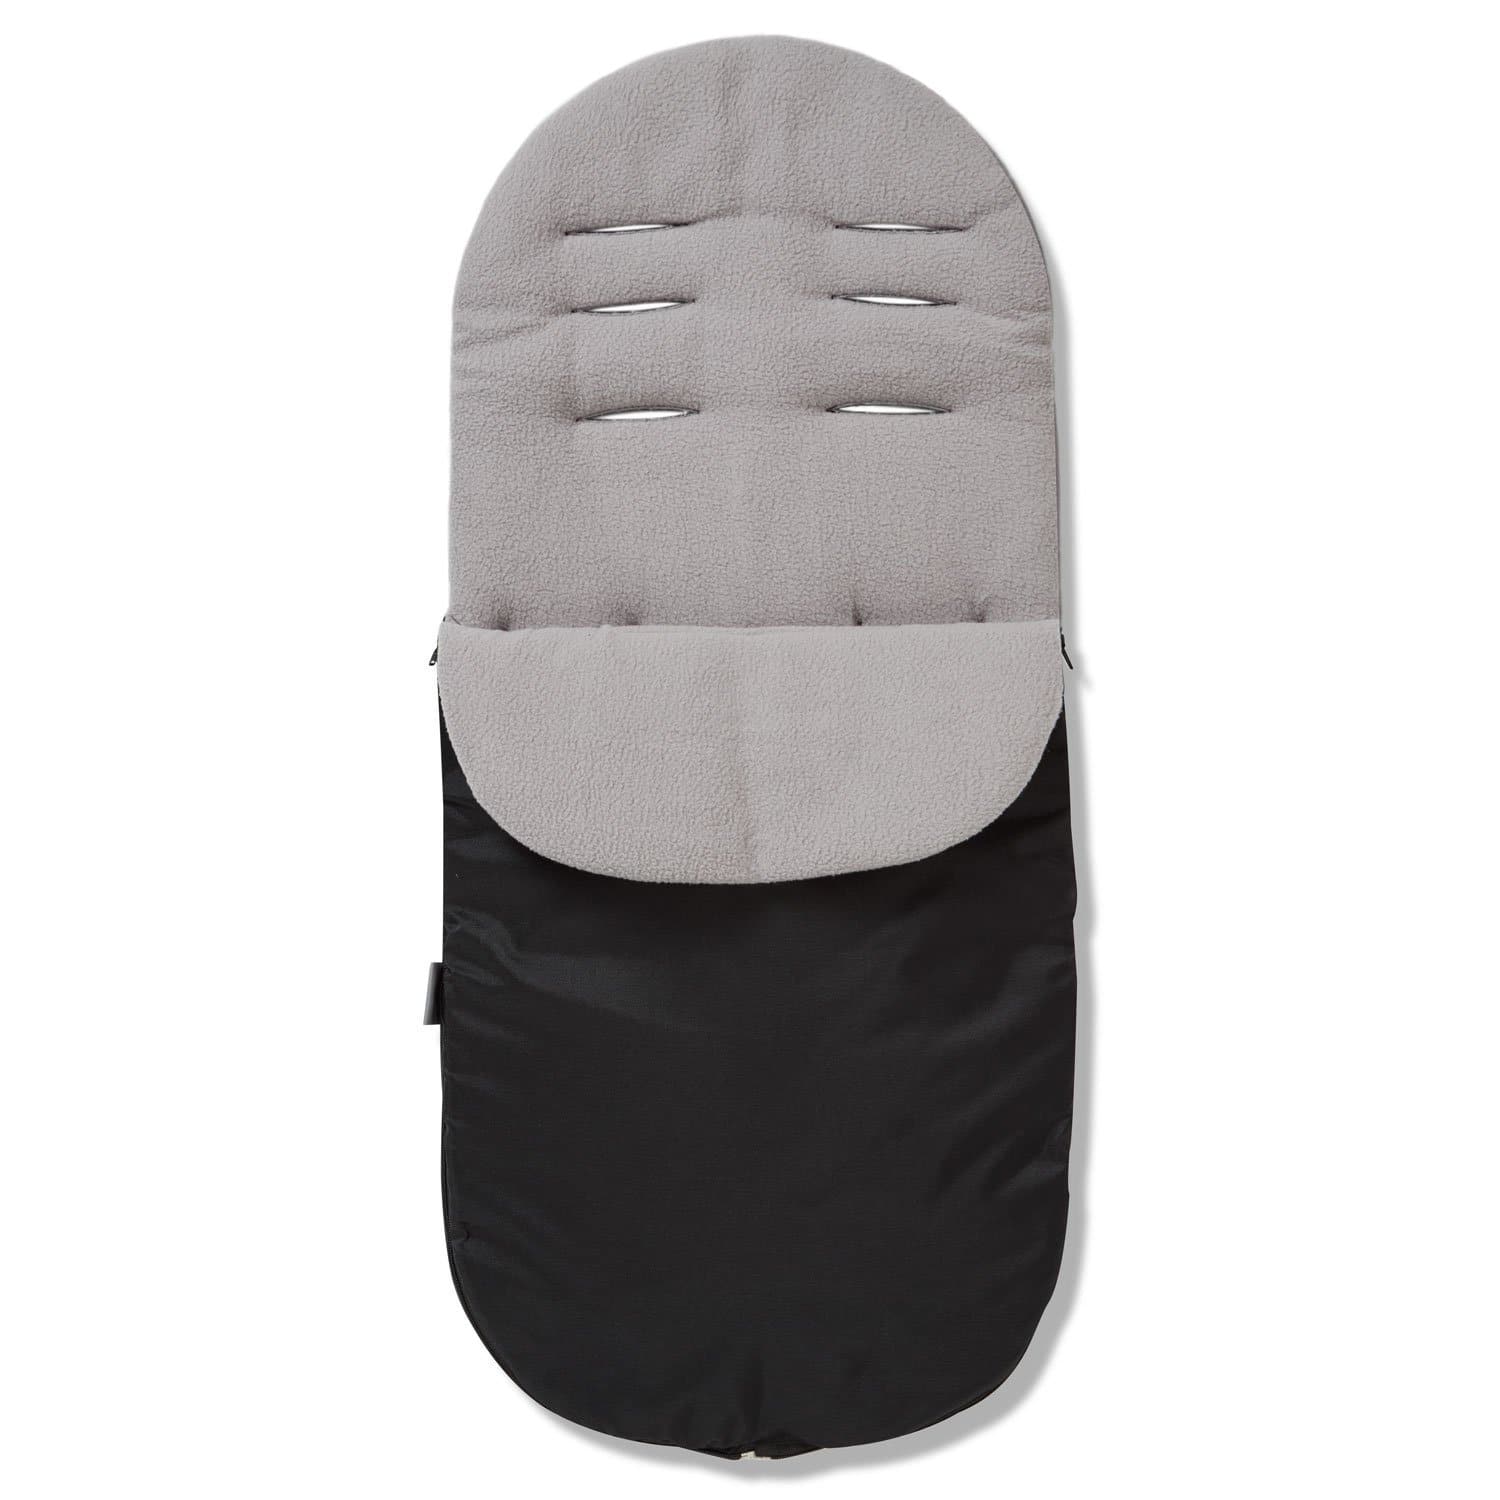 Footmuff / Cosy Toes Compatible with Britax - Grey / Fits All Models | For Your Little One